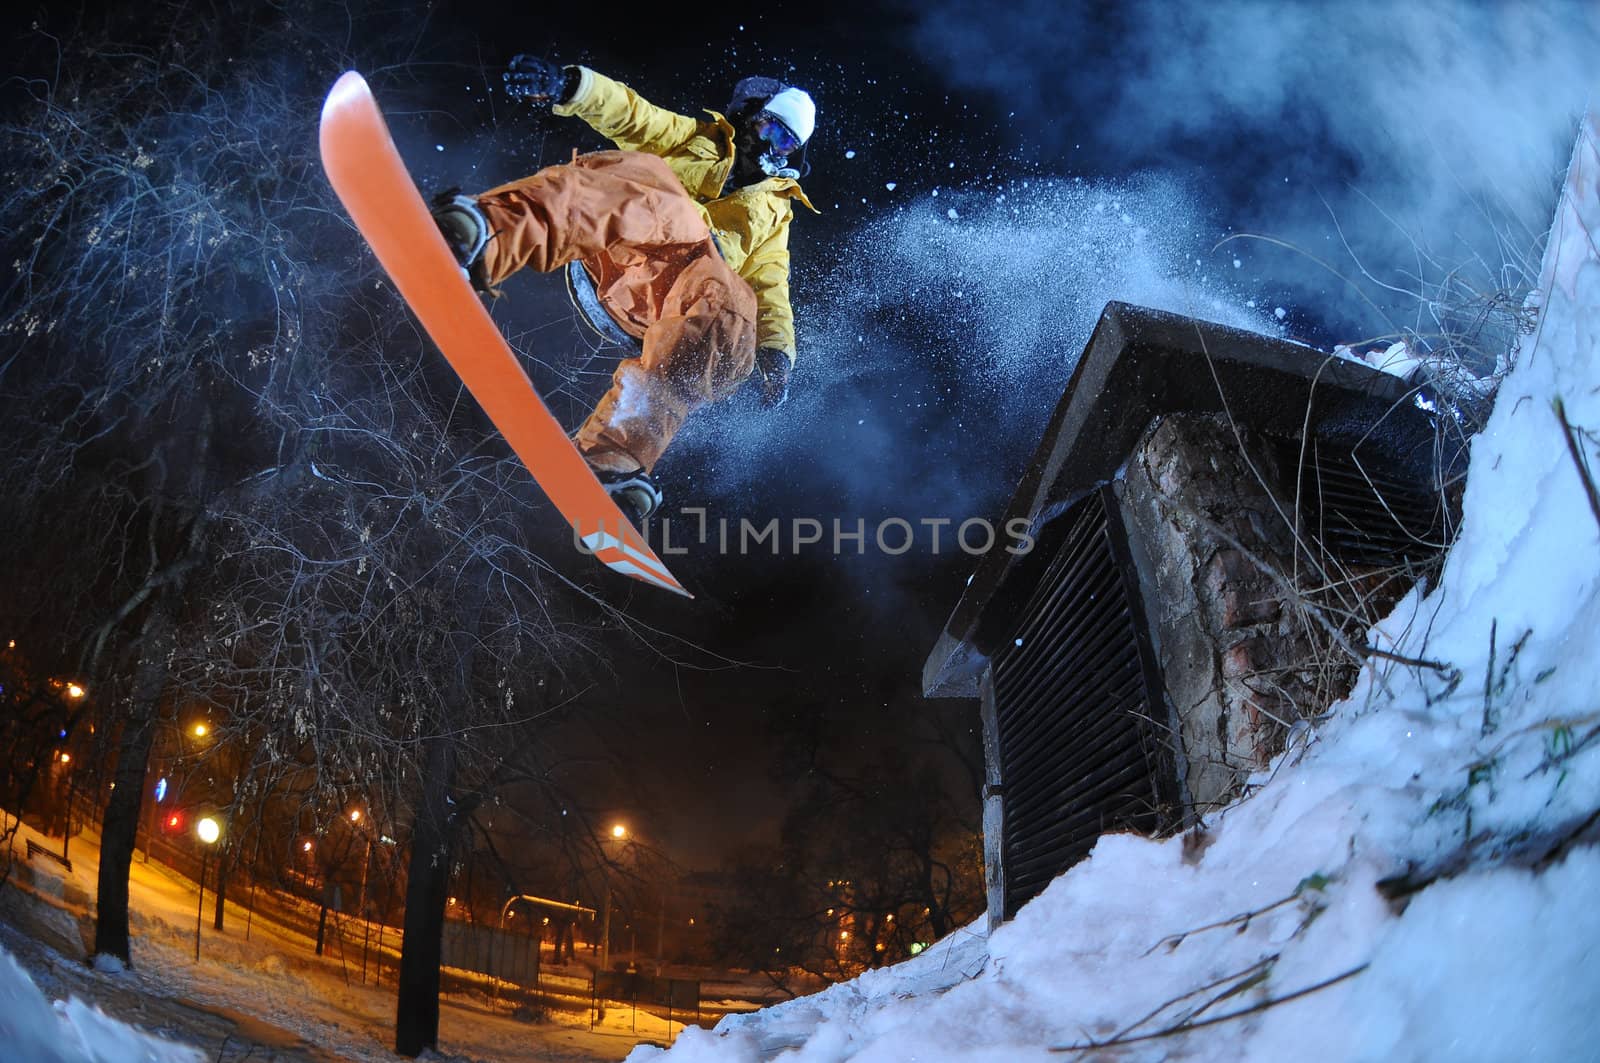 Jumping snowboarder in the city at night in winter